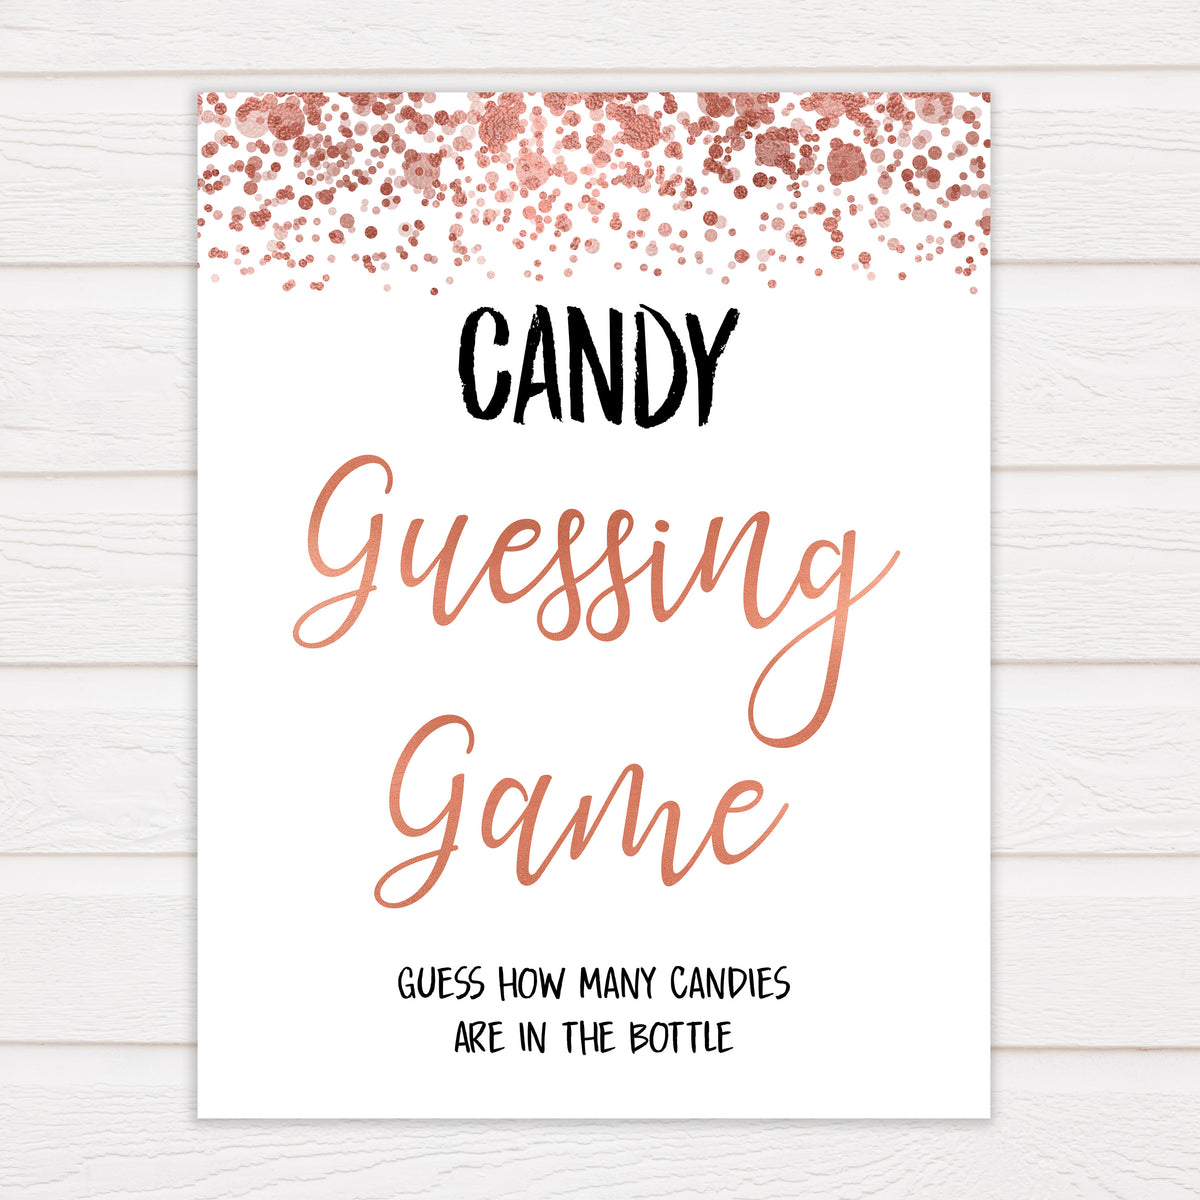 Candy Guessing Game Free Printable Printable Templates